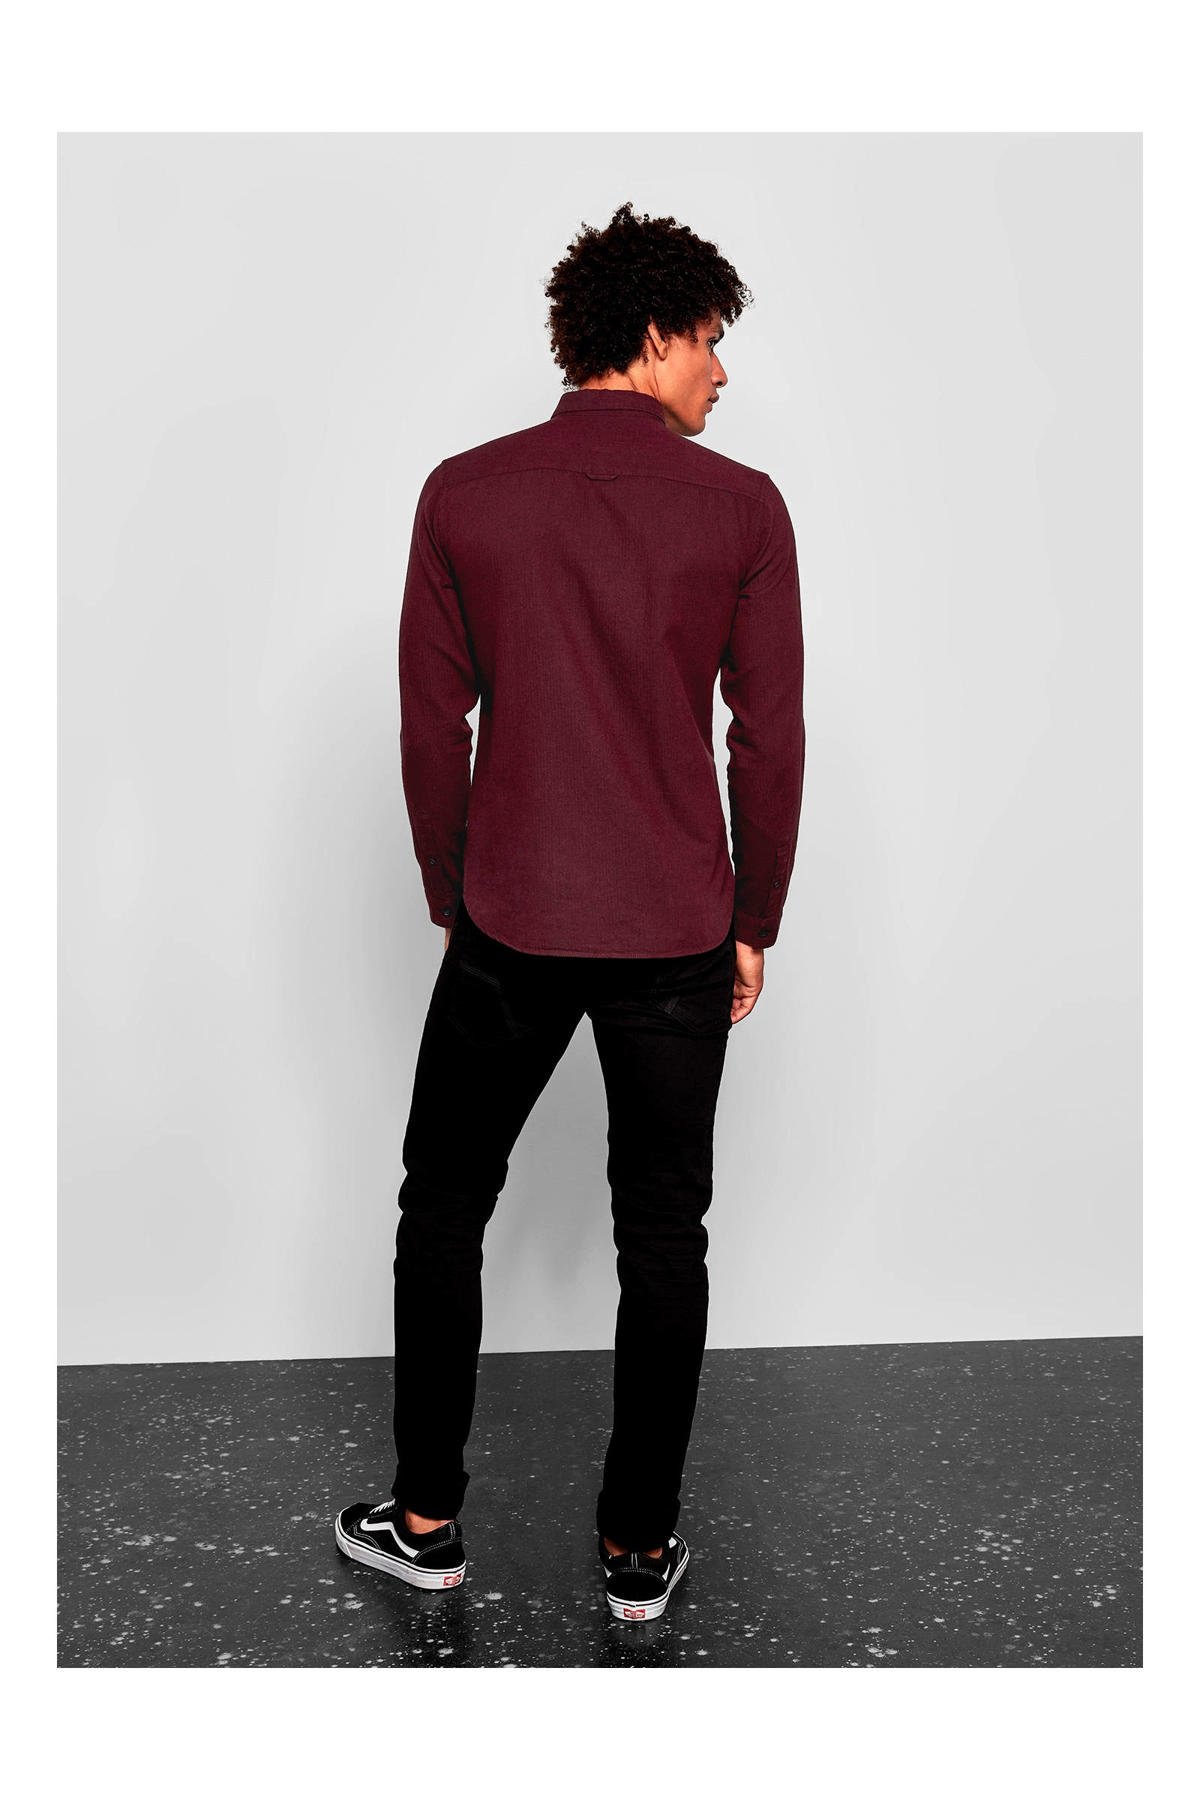 Q/S by s.Oliver slim fit overhemd bordeaux rood wehkamp